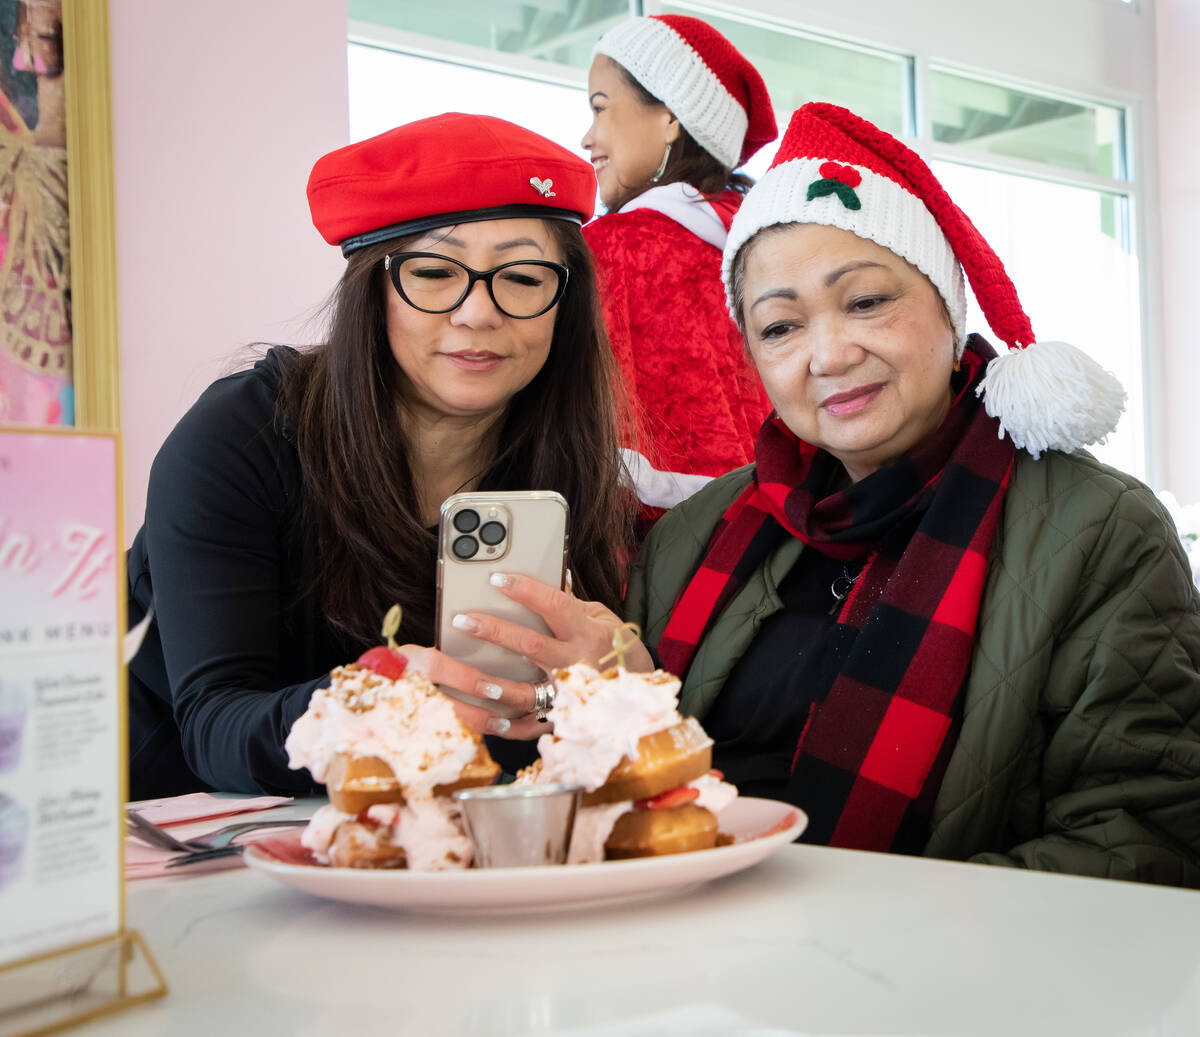 Portia Wigget, left, takes a photo of the Strawberry Shortcake Waffle at Cafe Lola on Friday, D ...